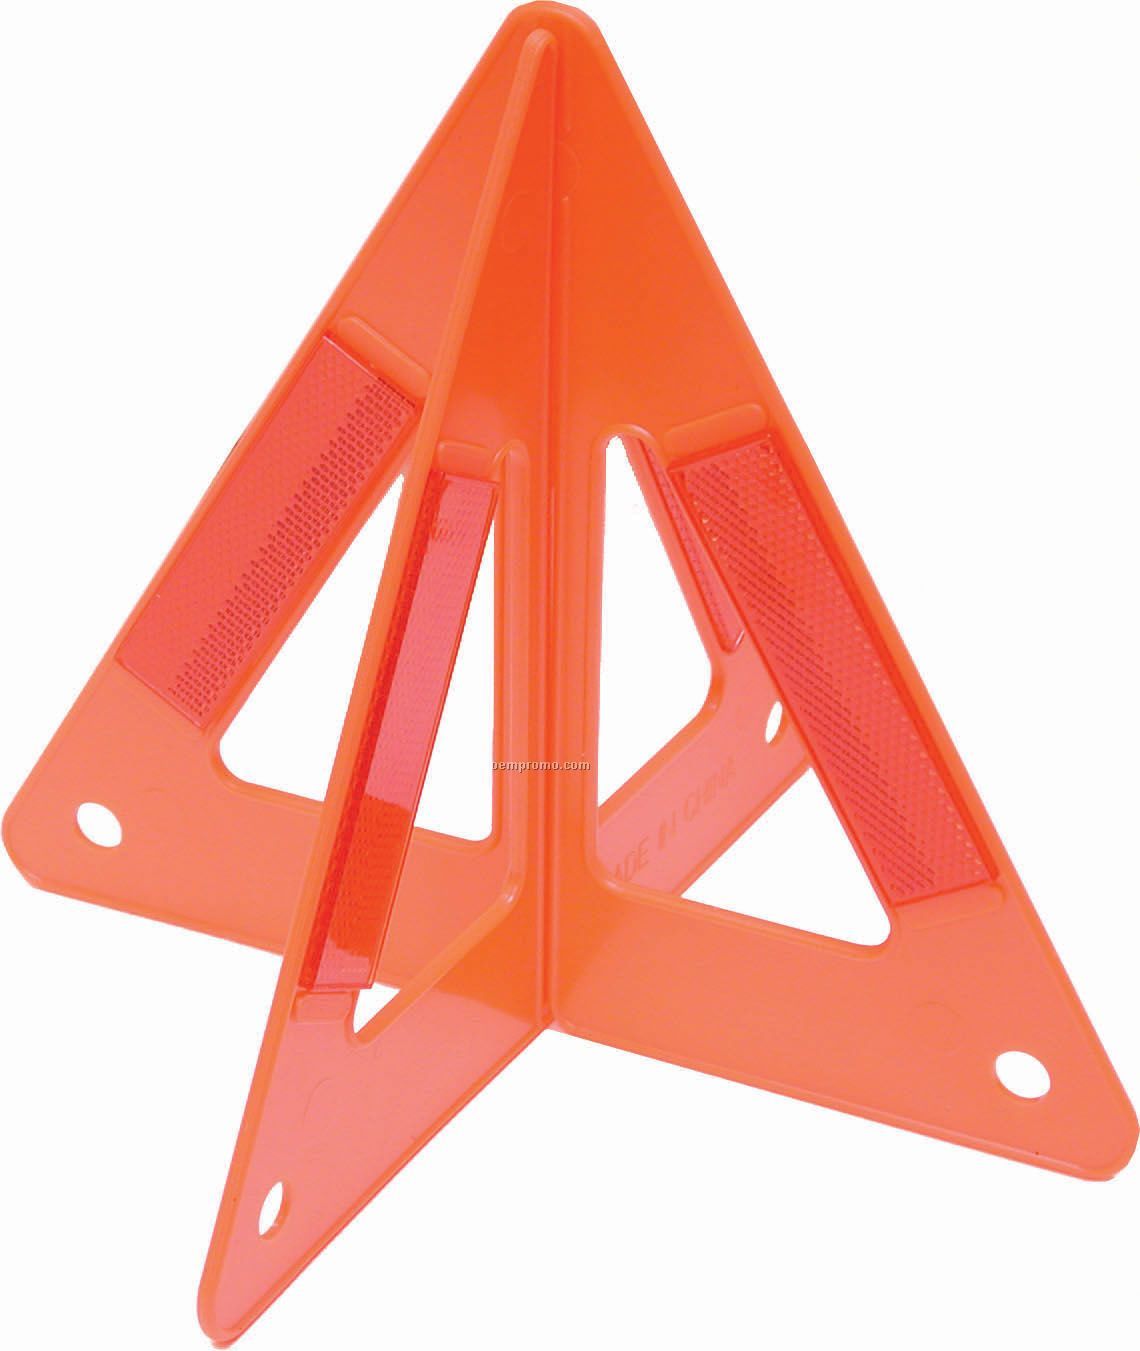 Warning Triangles (2 Piece) (Blank Only)